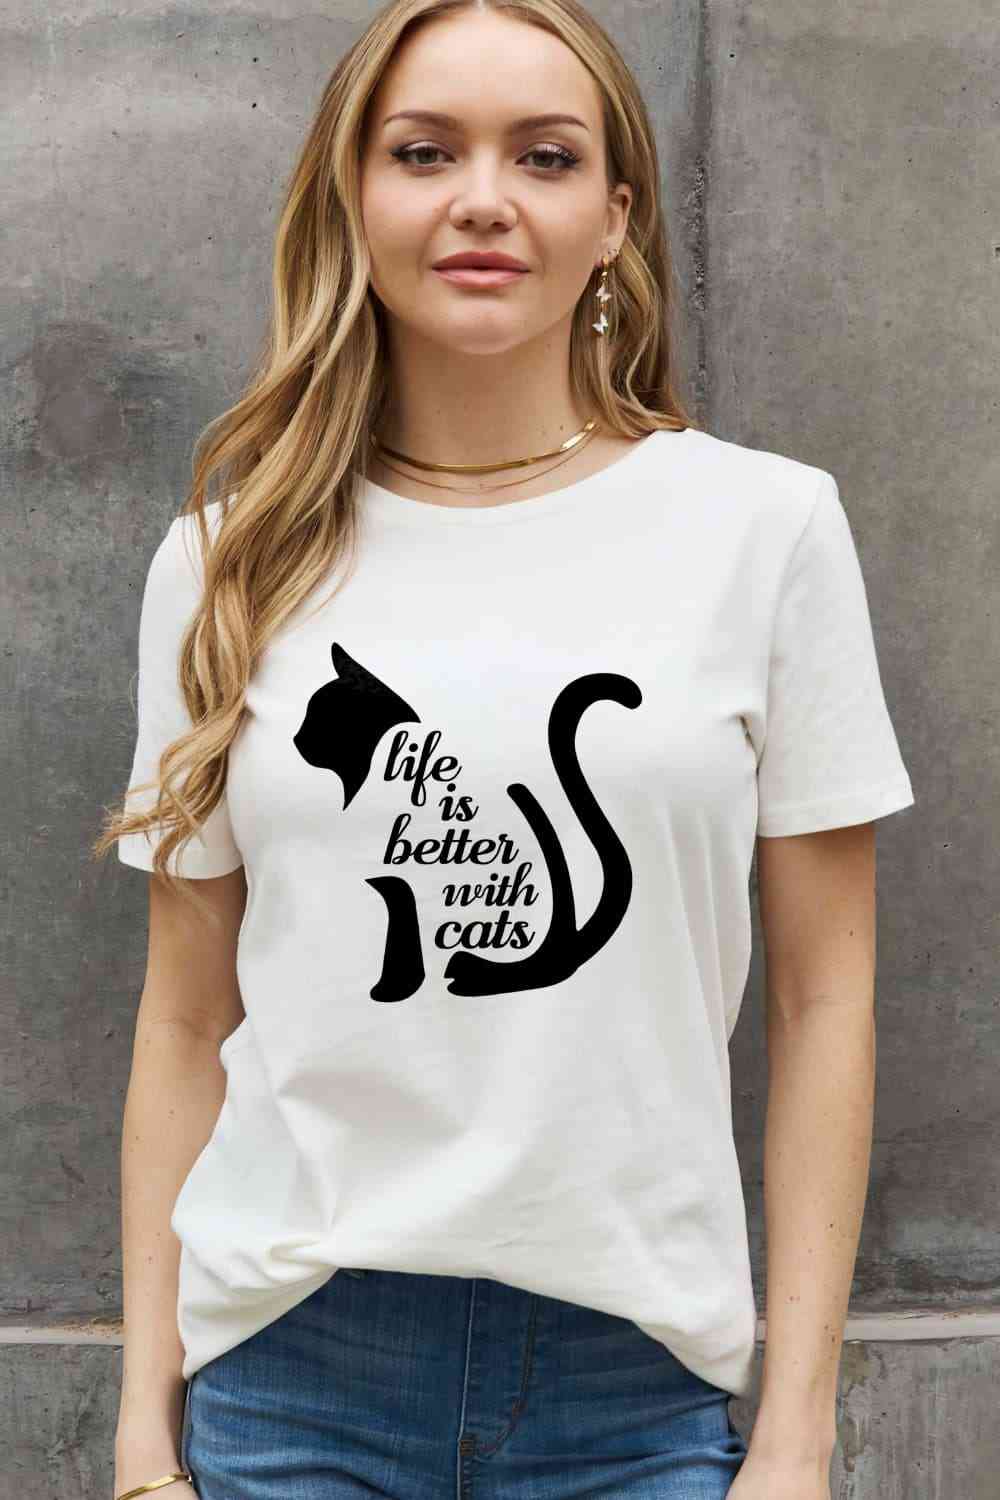 LIFE IS BETTER WITH CATS Graphic Cotton Tee - Bleach / S - T-Shirts - Shirts & Tops - 12 - 2024